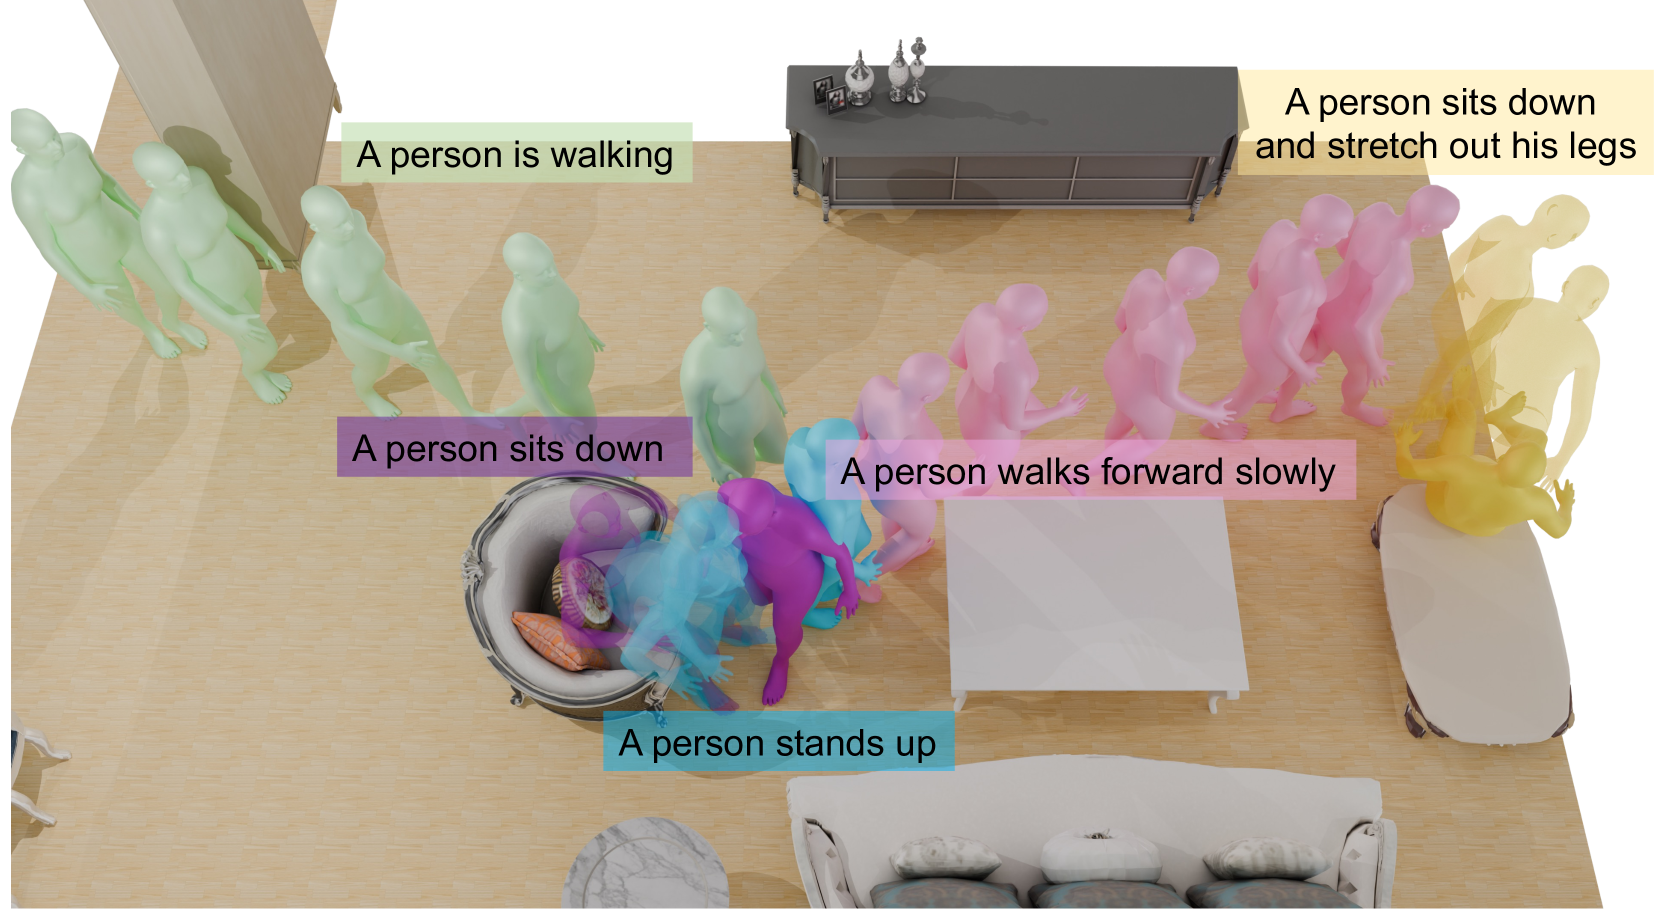 Generating Human Interaction Motions in Scenes with Text Control